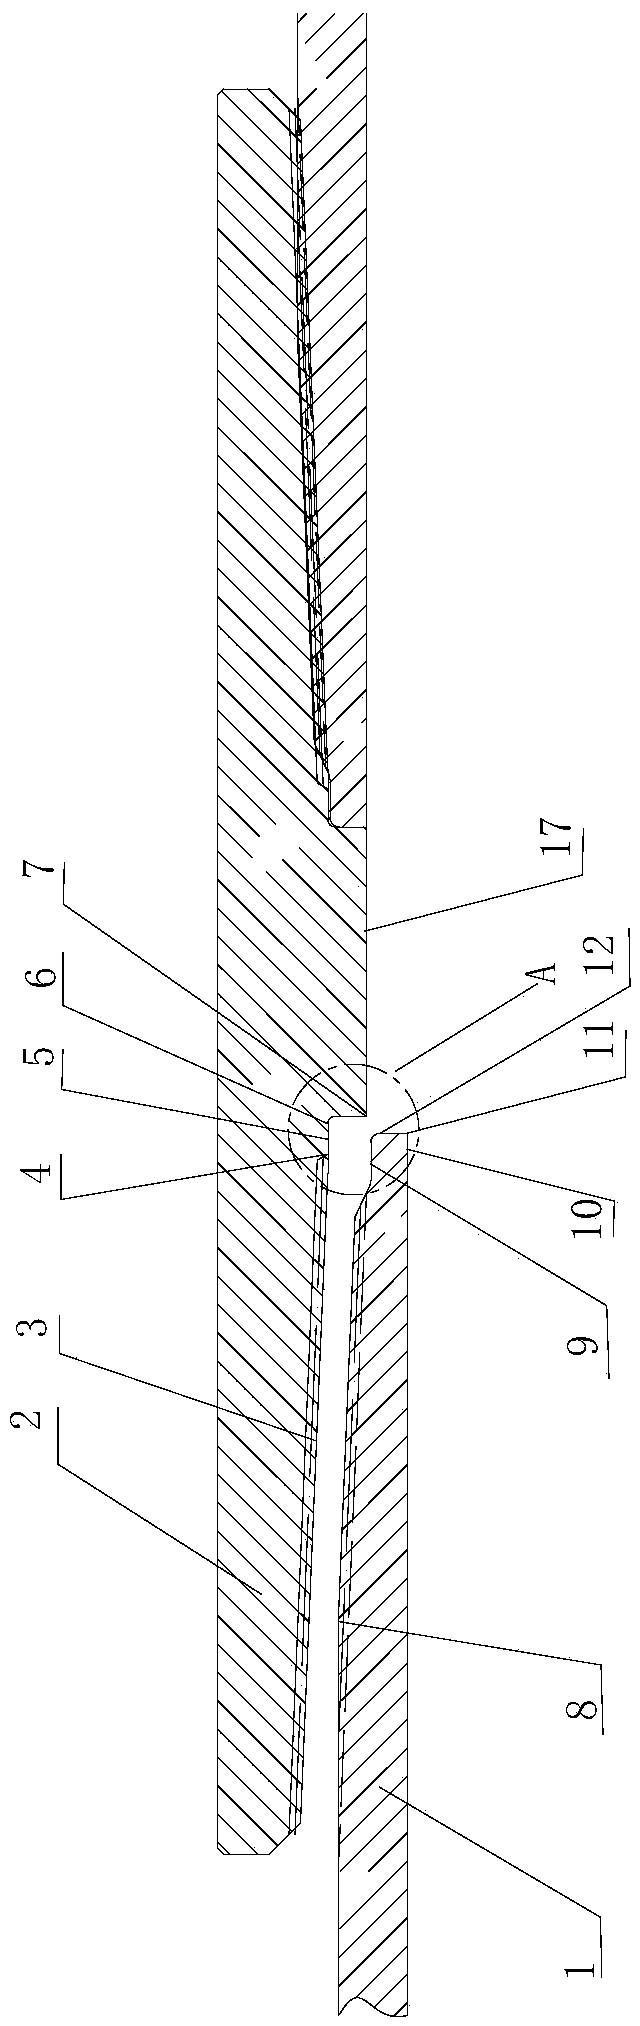 Double-lead petroleum casing pipe threaded connection mechanism and casing pipe pillar thereof